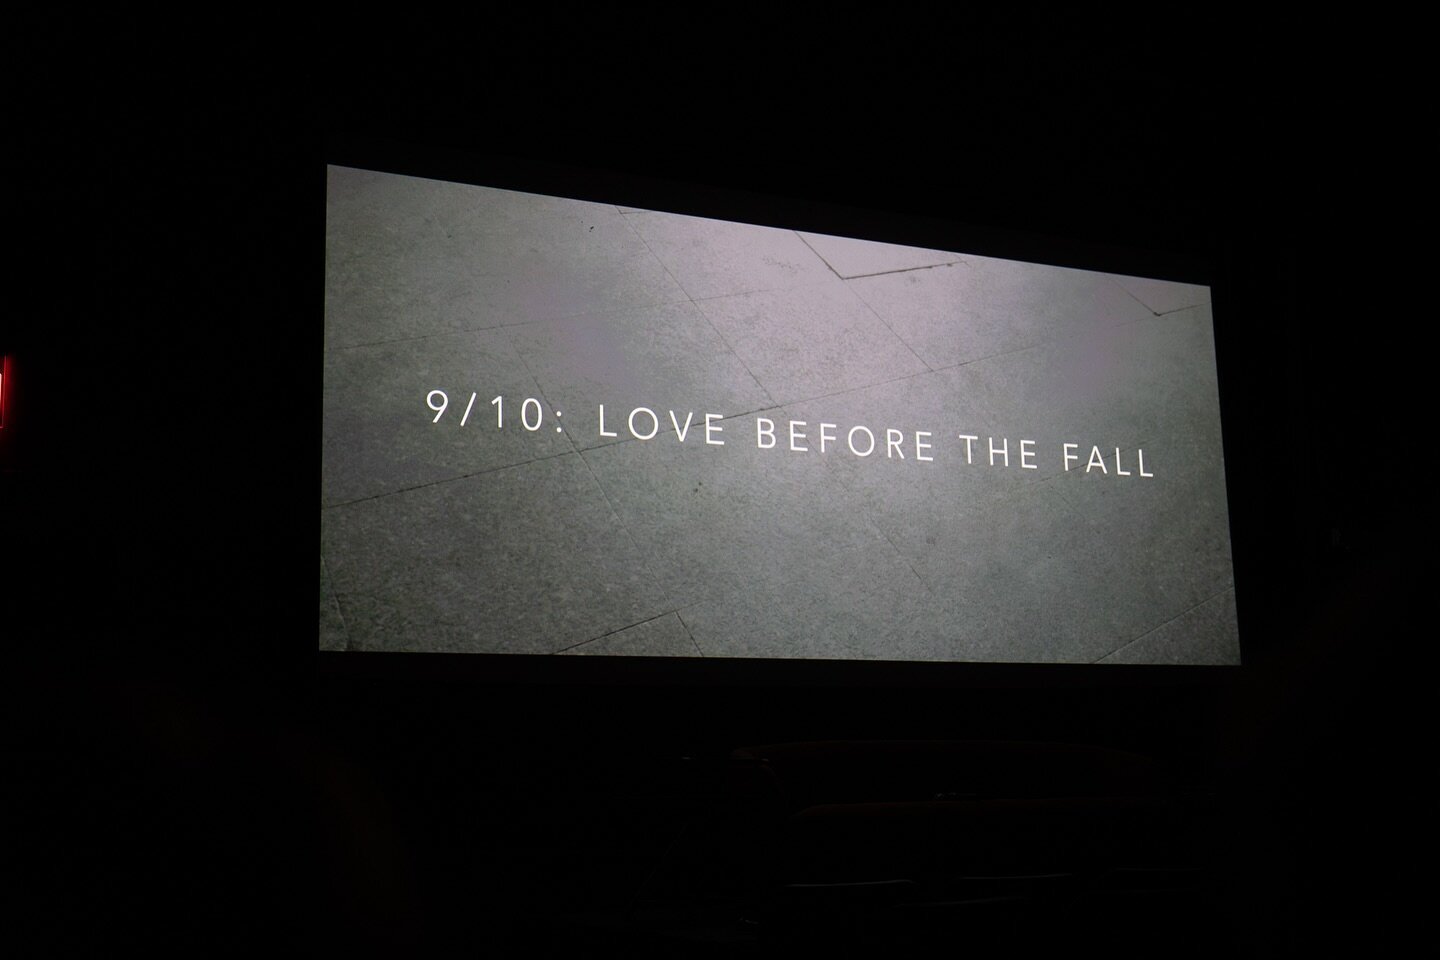 Thank you to everyone who made the 25 March screening &amp; talkback of our #operafilm &ldquo;9/10: Love Before the Fall&rdquo; such an emotionally-fulfilling, humane event. So much love in the theater. 

#gratitude 
#auteurindependant 
#artistsonins